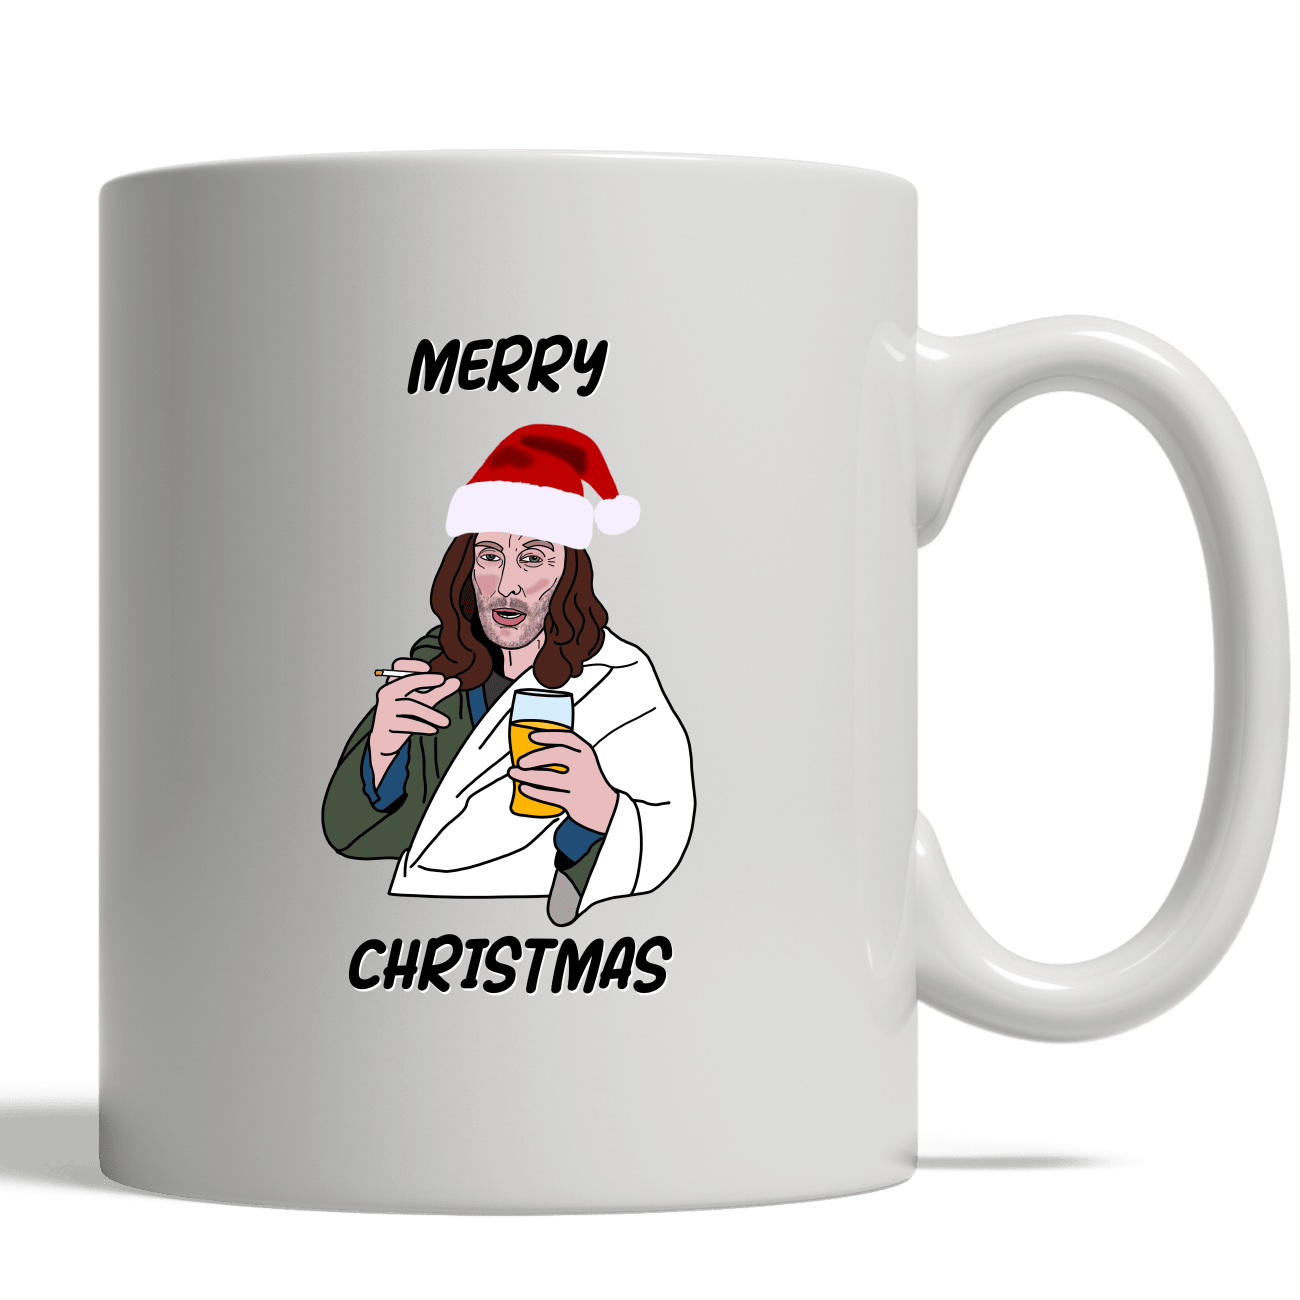 You can get 20% off Christmas jumpers, mugs, and more in The Manc Store&#8217;s Black Friday sale, The Manc